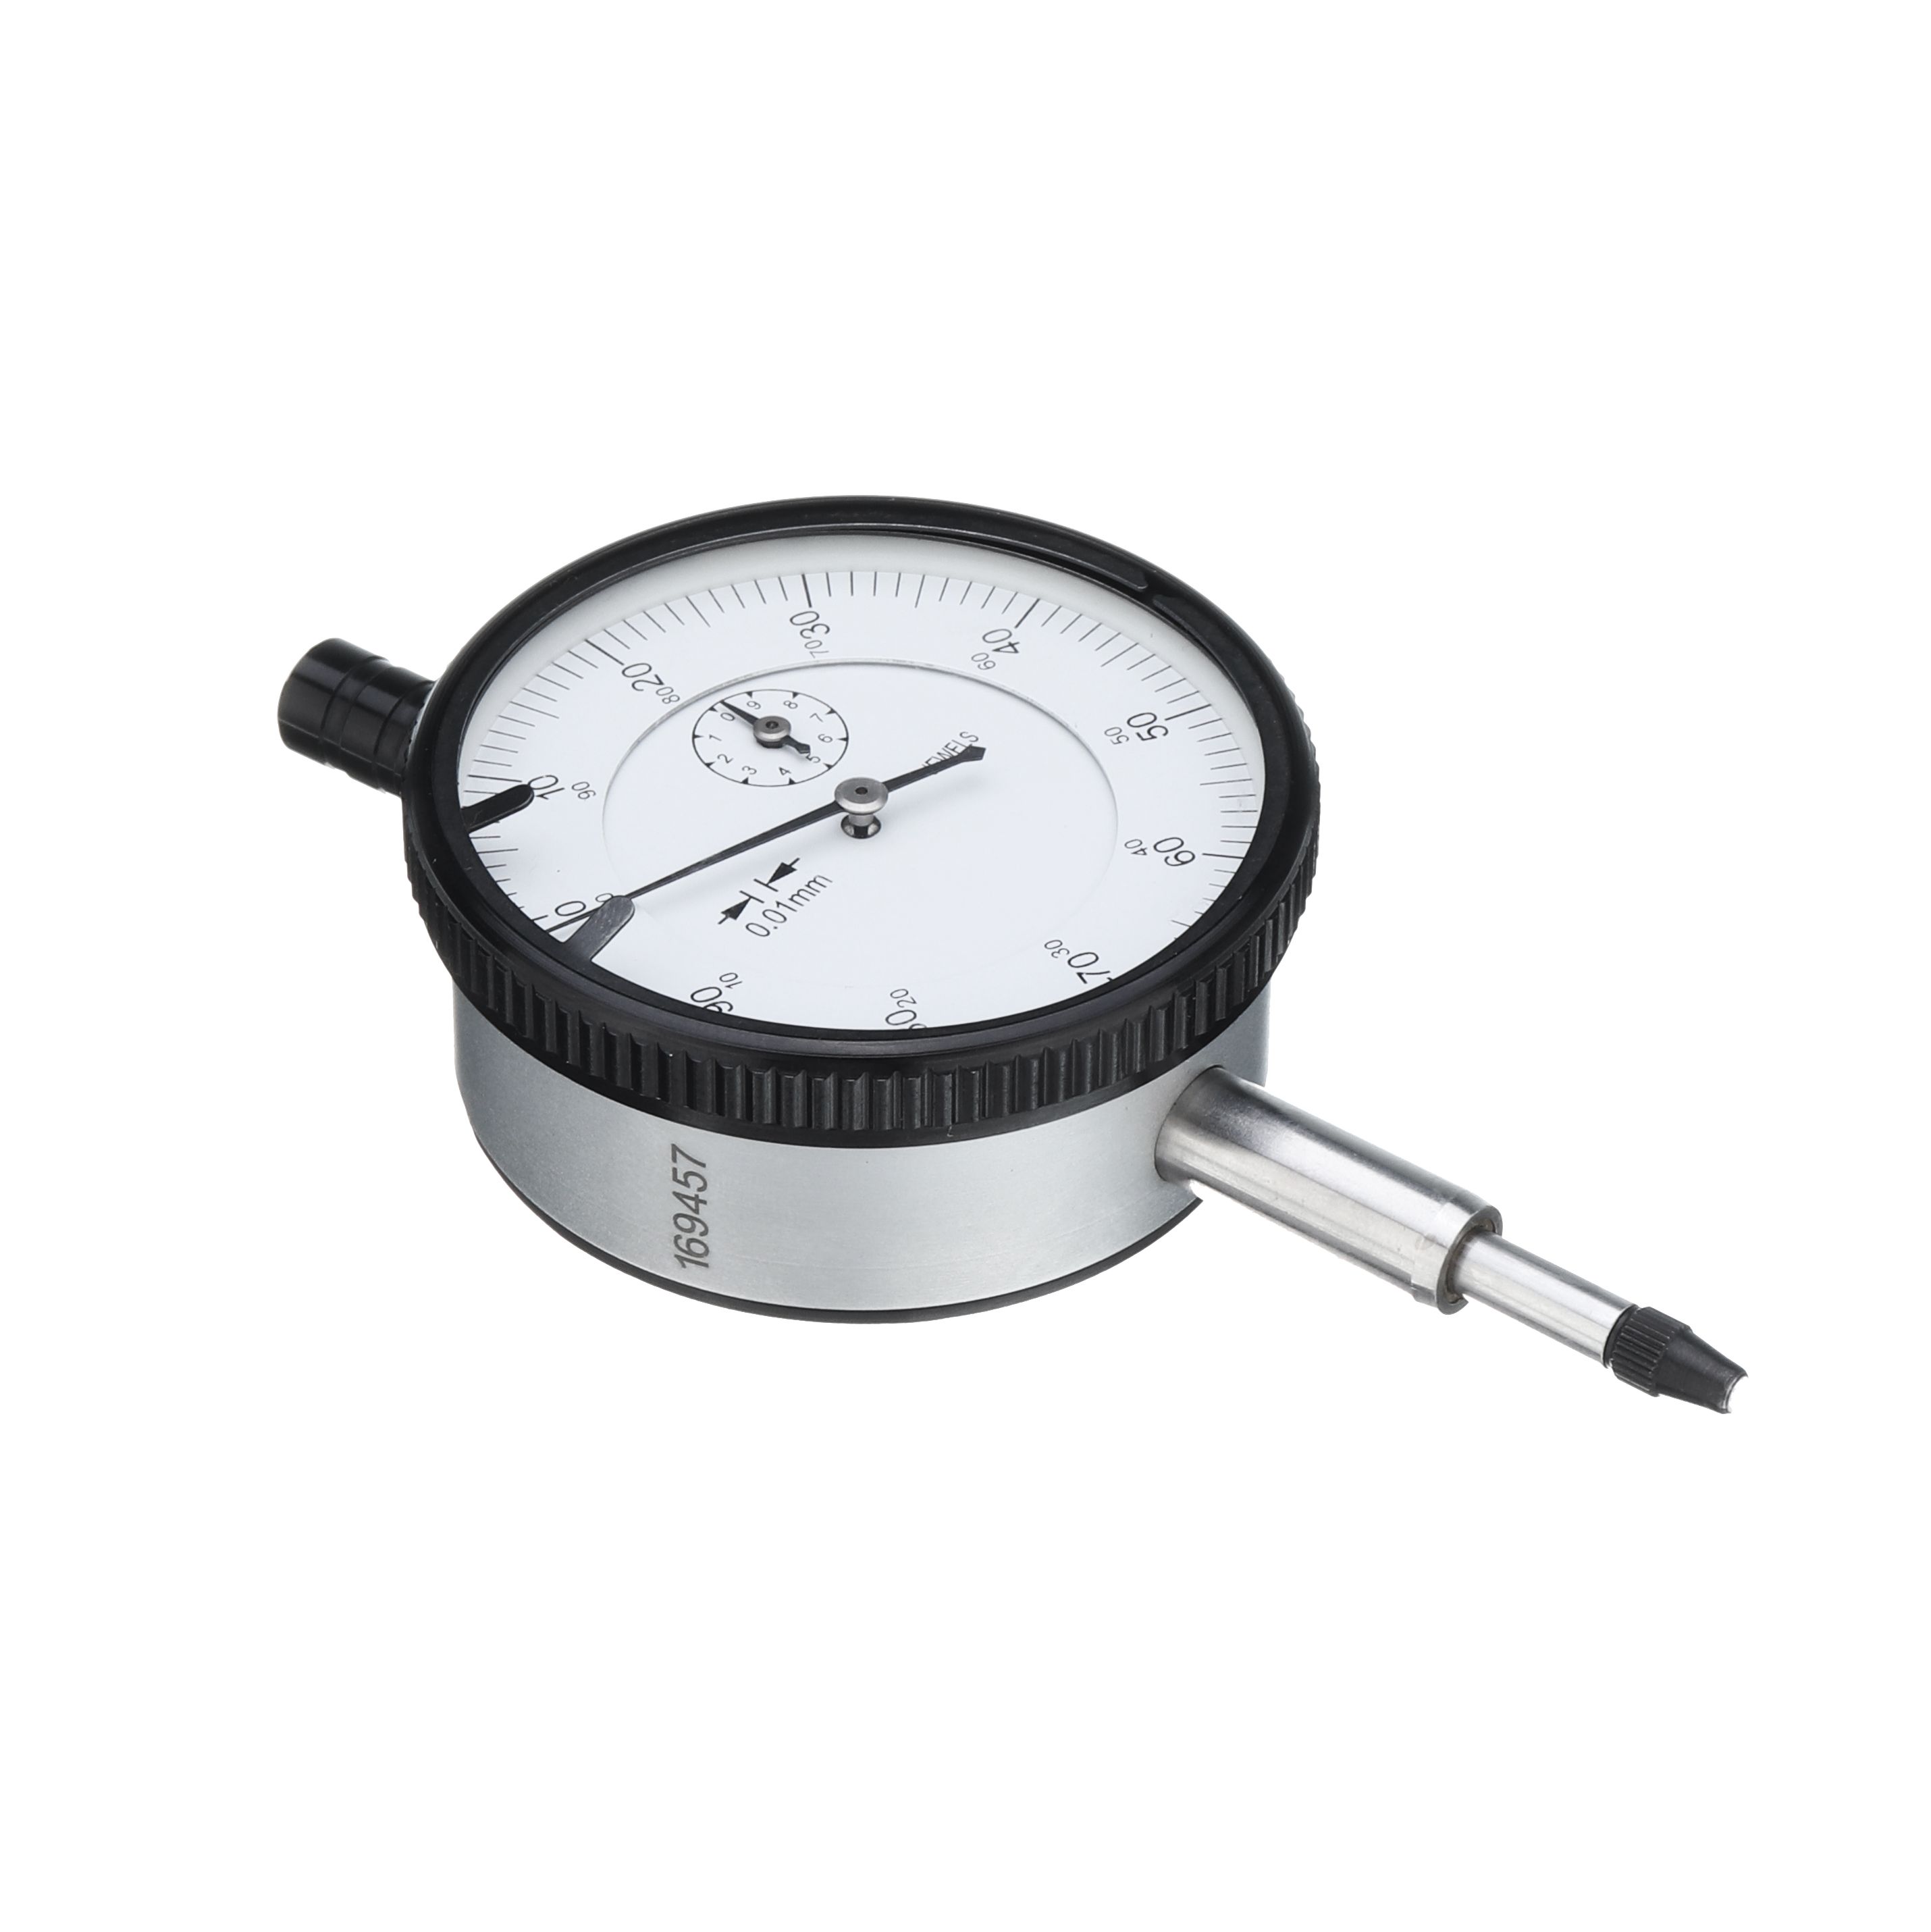 0-10mm-Precision-Dial-Indicator-with-Drill-Bit-Dial-Gauge-001MM-Resolution-58mm-Table-Diameter-1494631